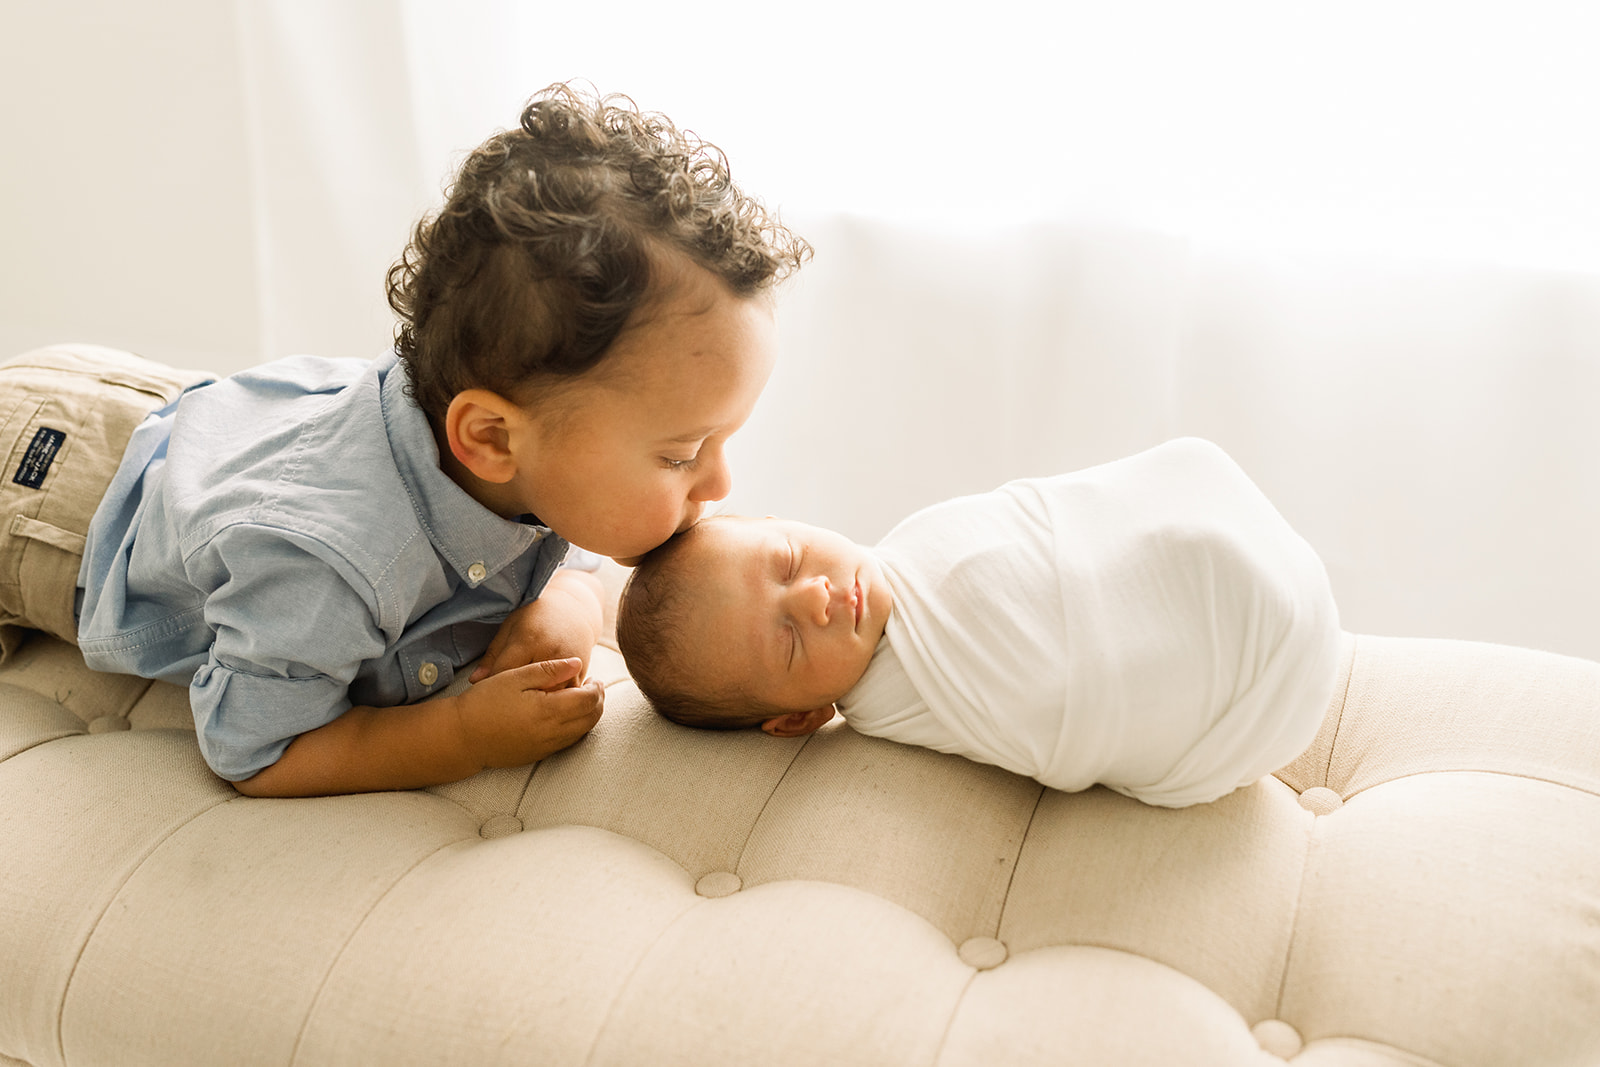 A young boy in a blue shirt kisses the head of his sleeping newborn baby sibling on a tan couch by a window